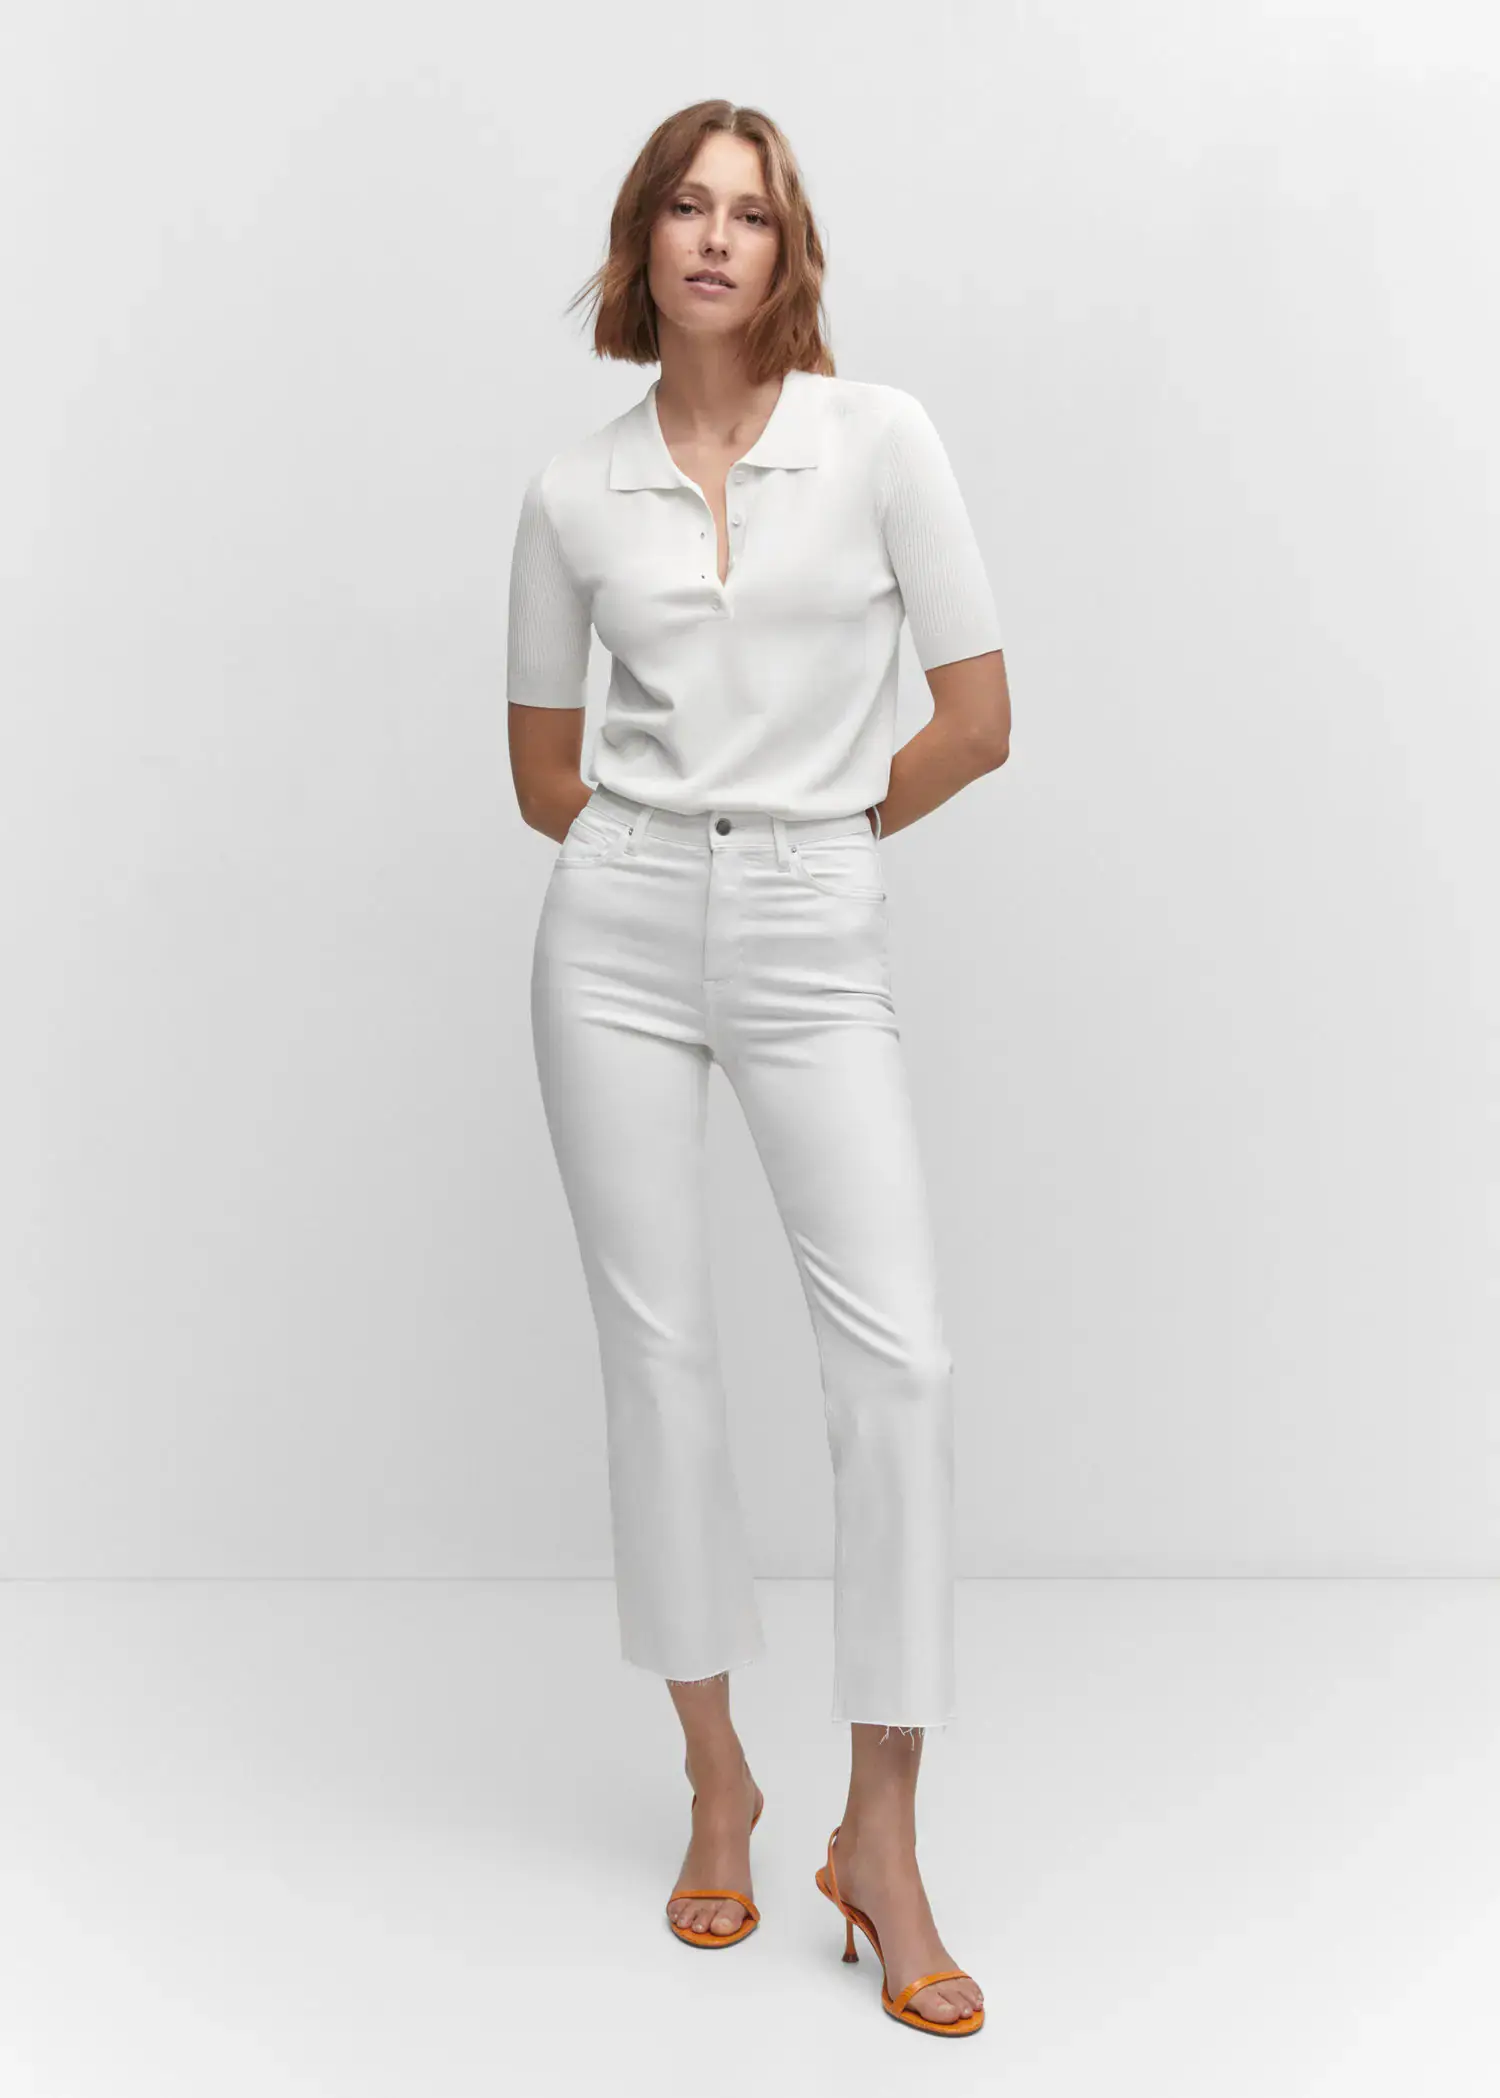 Mango Crop flared jeans. a woman wearing white pants and a white shirt. 